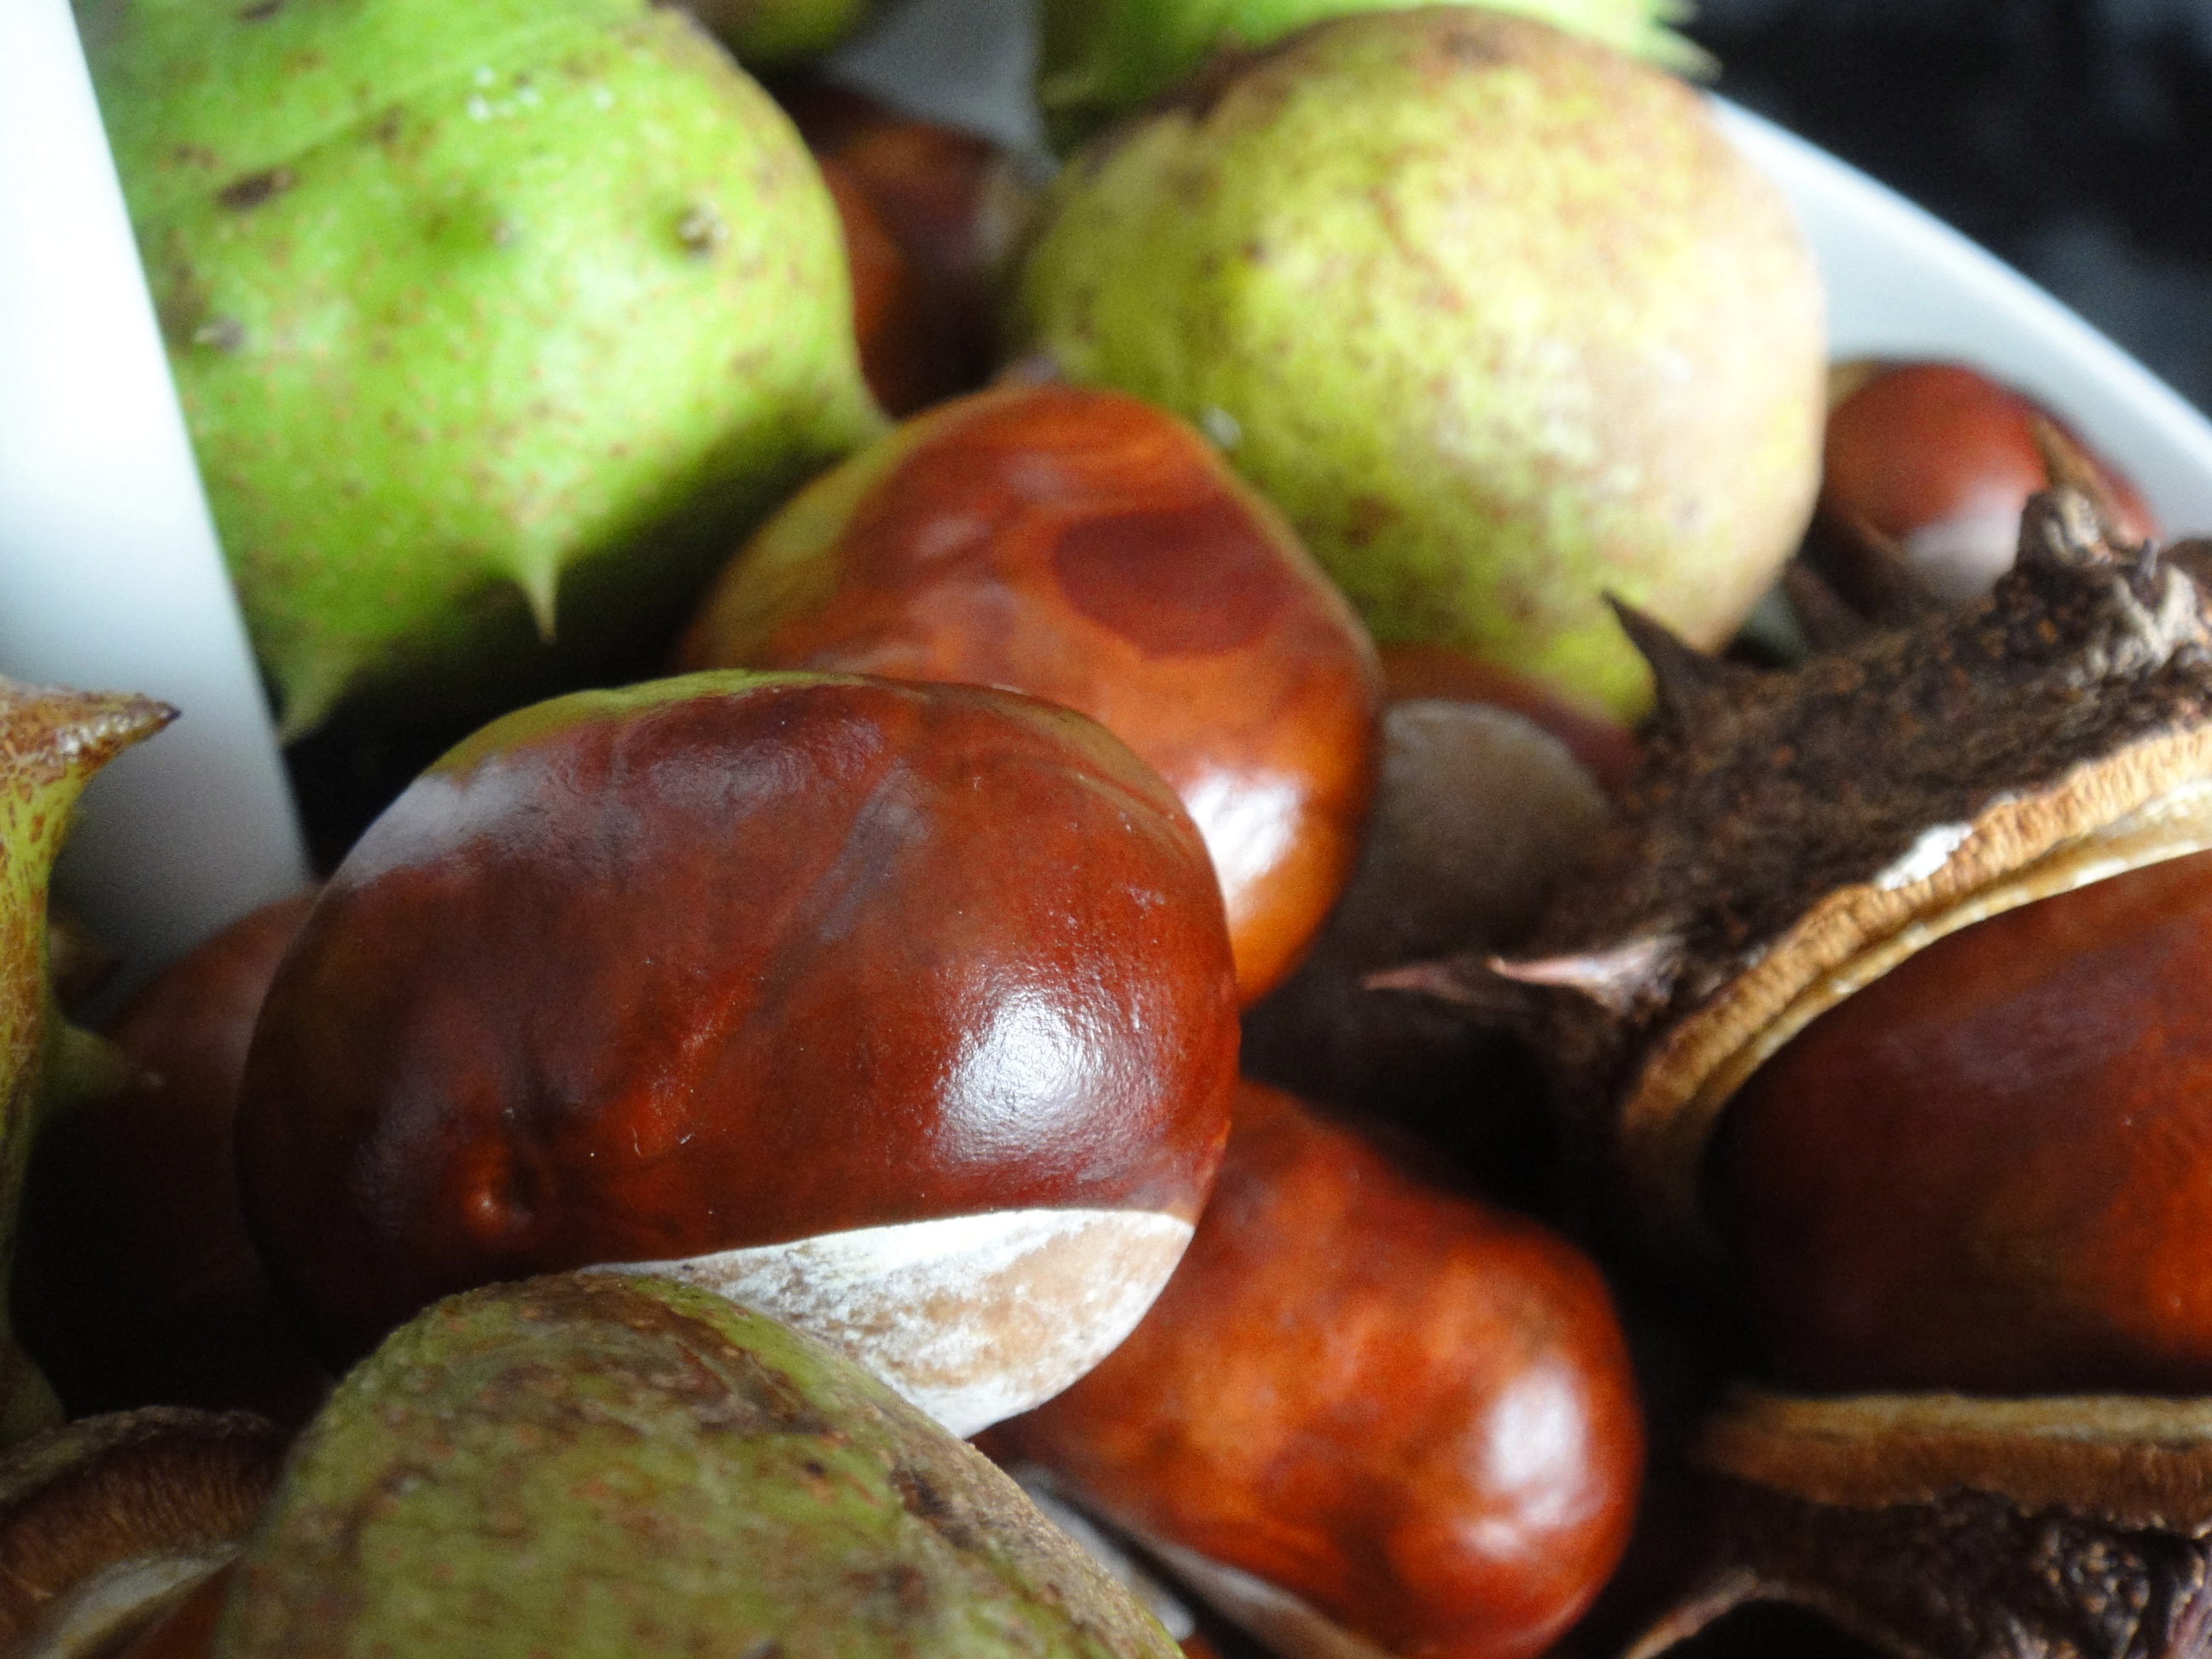 Collecting conkers for a classy seasonal display | The Daily Norm